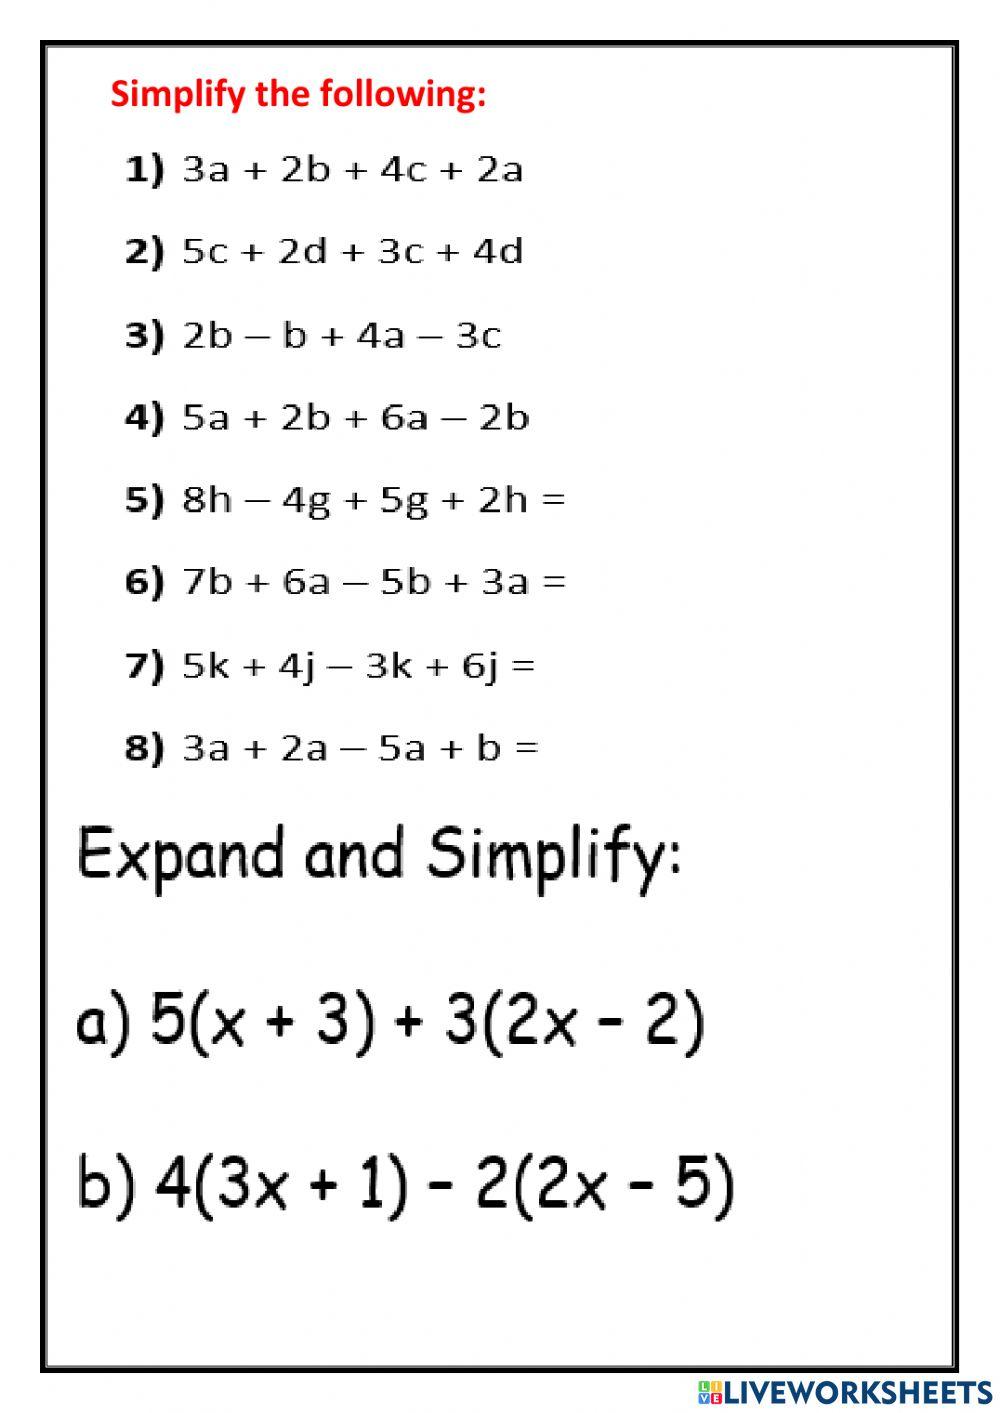 Simplify and expand brackets